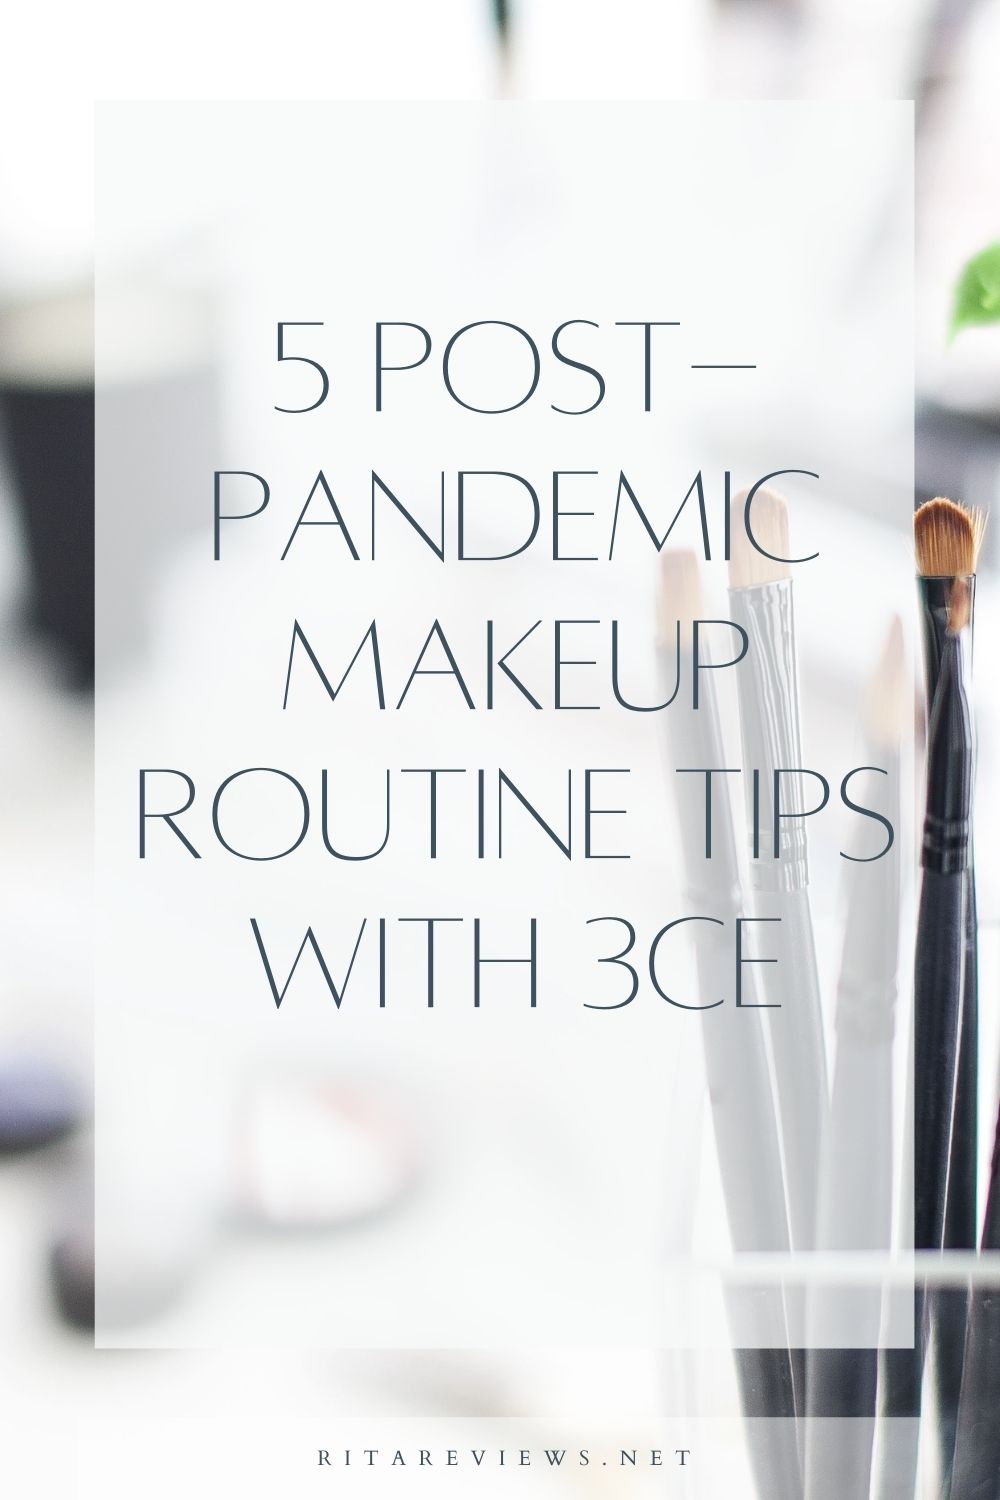 5 Post-Pandemic Makeup Routine Tips with 3CE